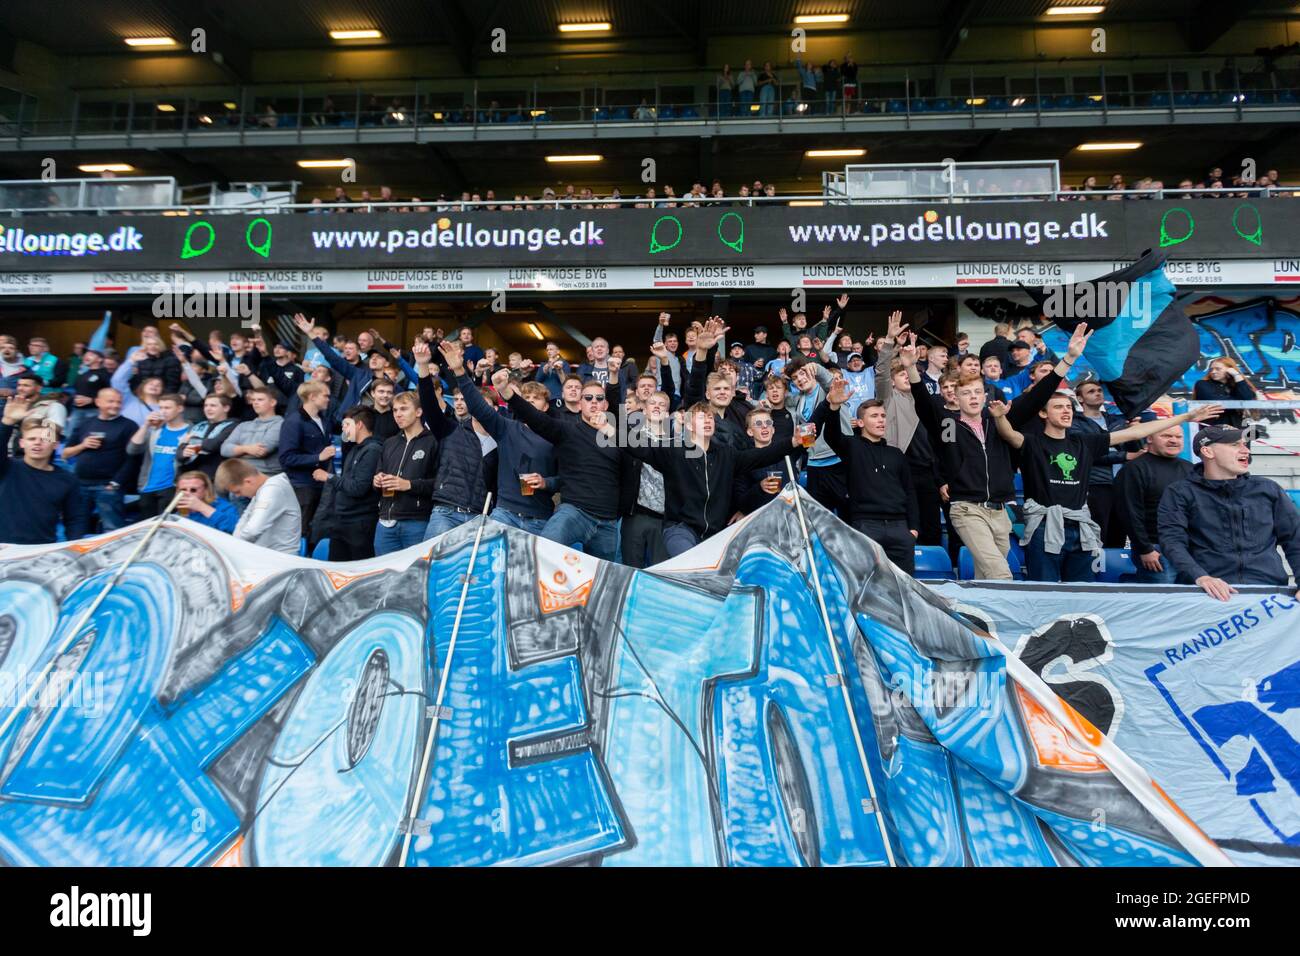 Randers, Denmark. 19th Aug, 2021. Football fans of Randers FC seen on the  stands during the UEFA Europa League qualification match between Randers FC  and Galatasaray at Cepheus Park in Randers. (Photo